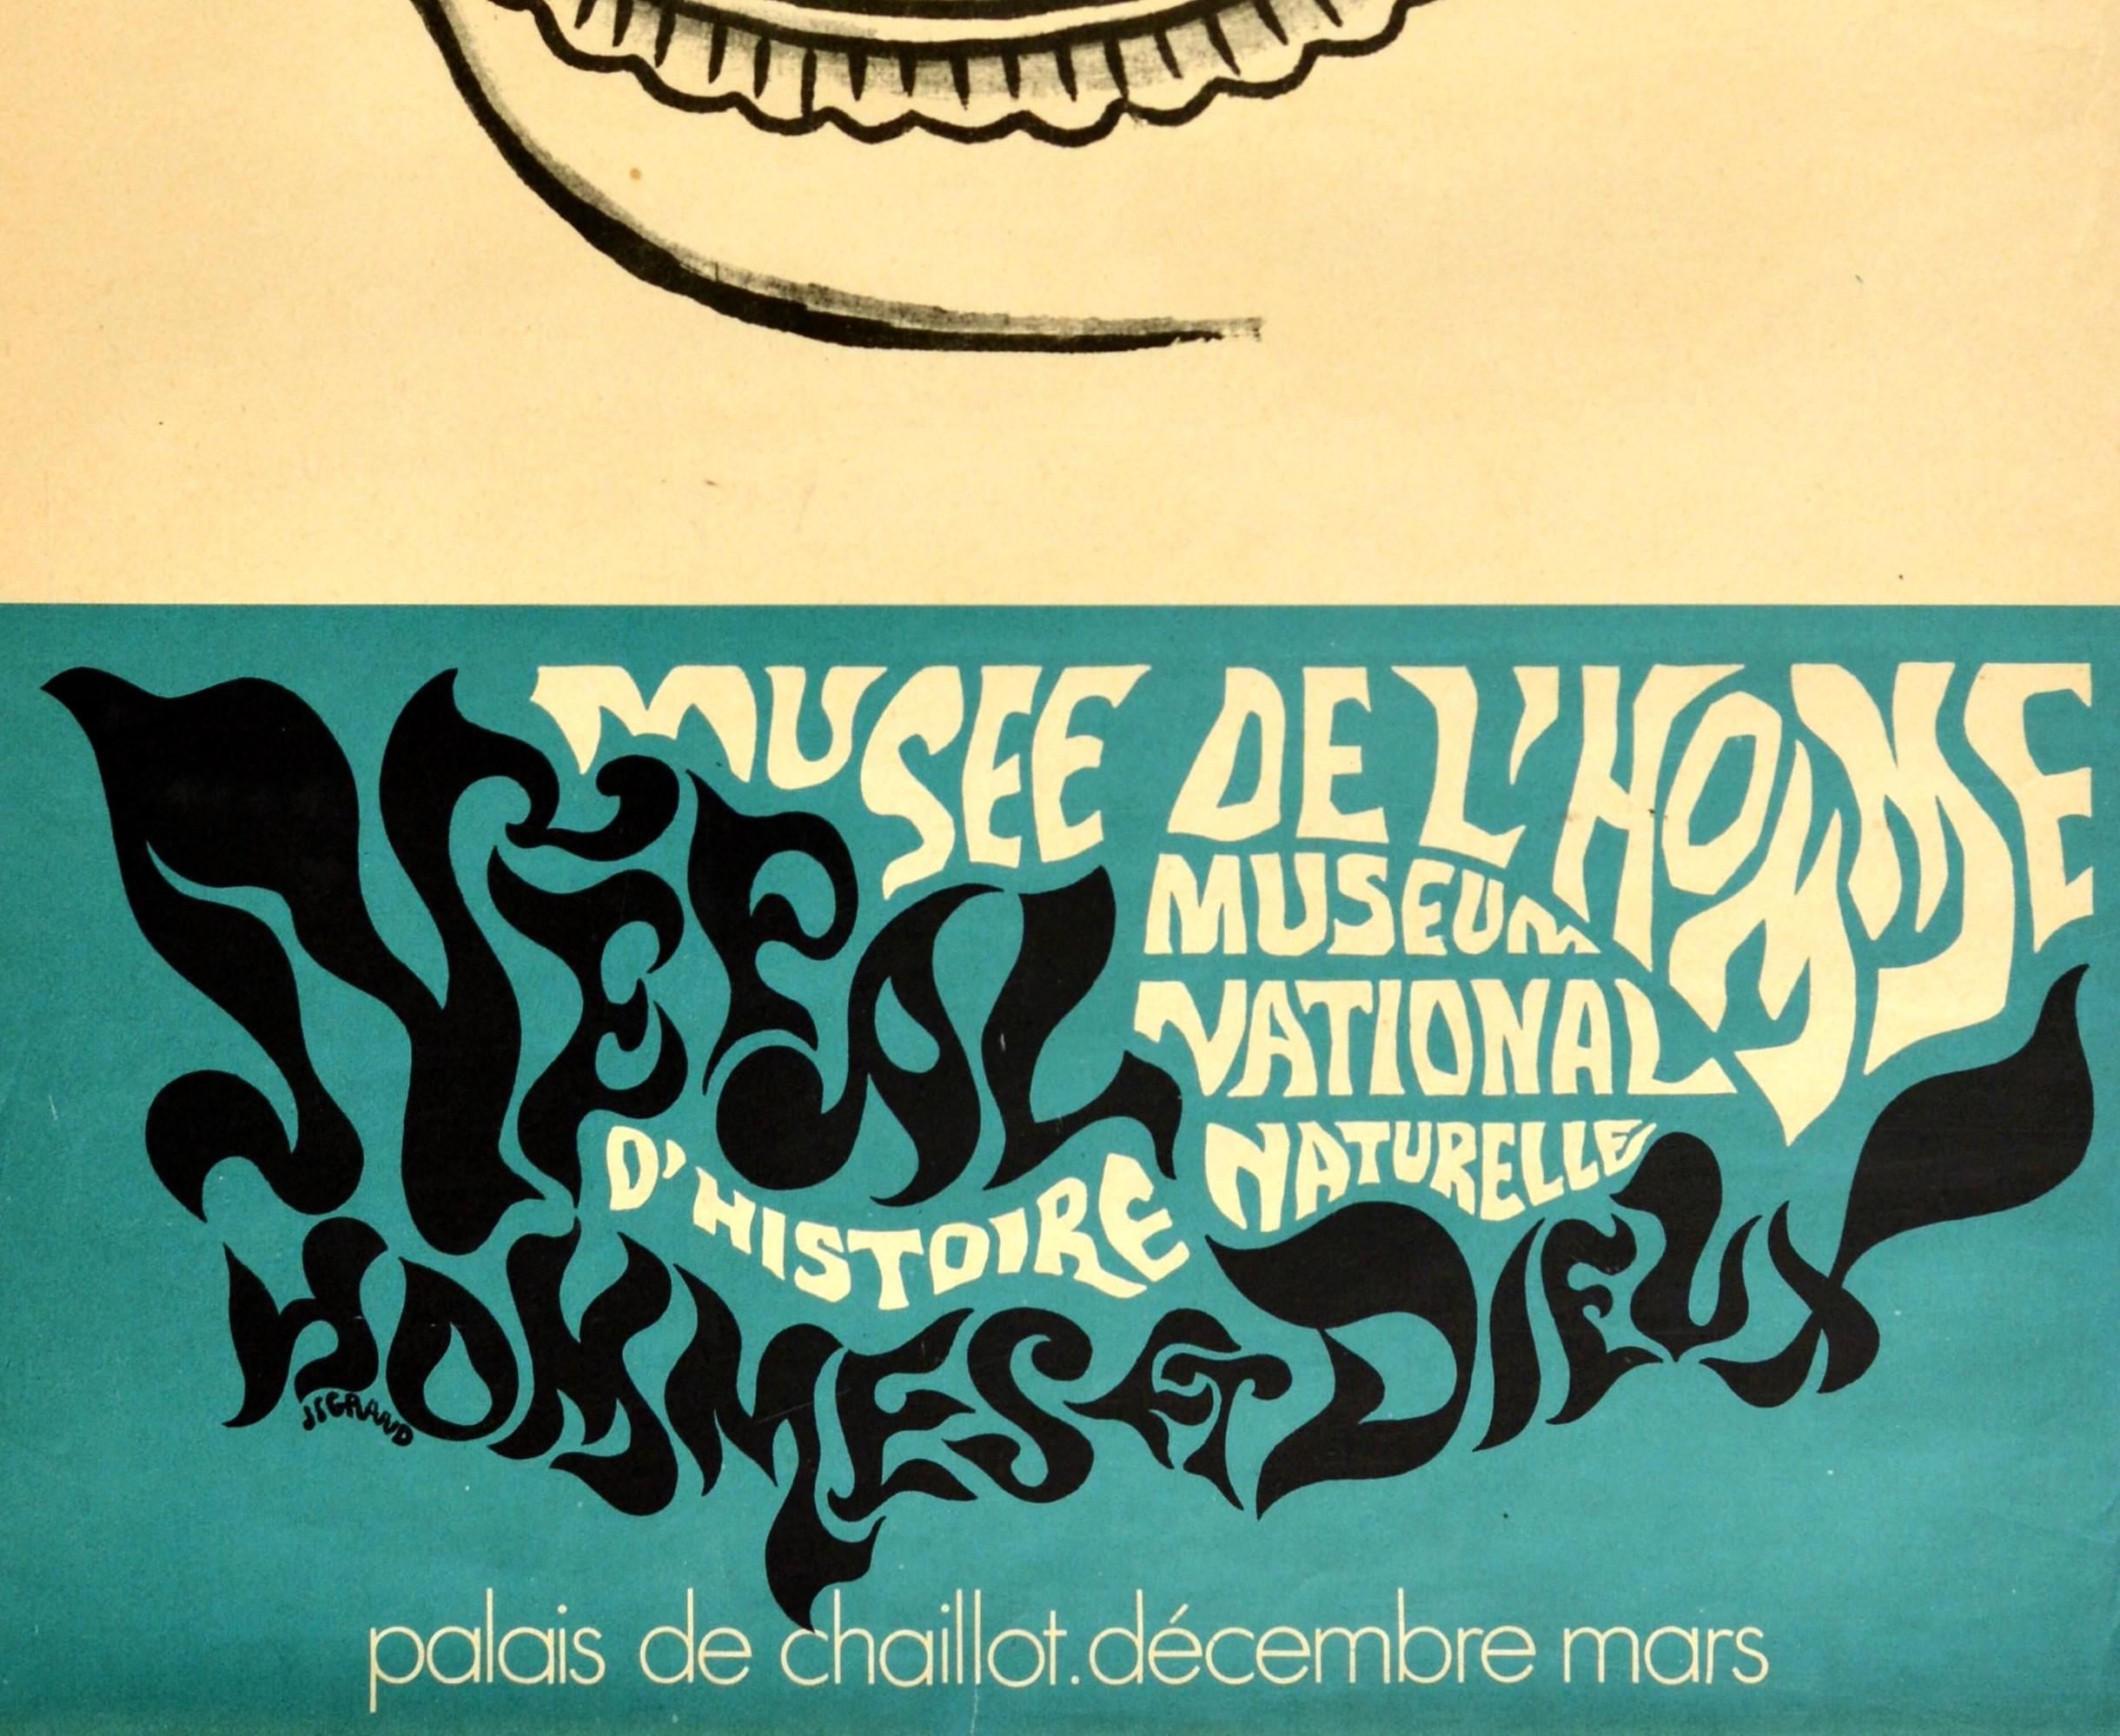 Original vintage exhibition poster for the Musee de l'Homme Museum National d'Histoire Naturelle Nepal Hommes et Dieux / Museum of Man National Museum of Natural History Nepal Men and Gods held from December 1969 to May 1970 featuring the bold blue